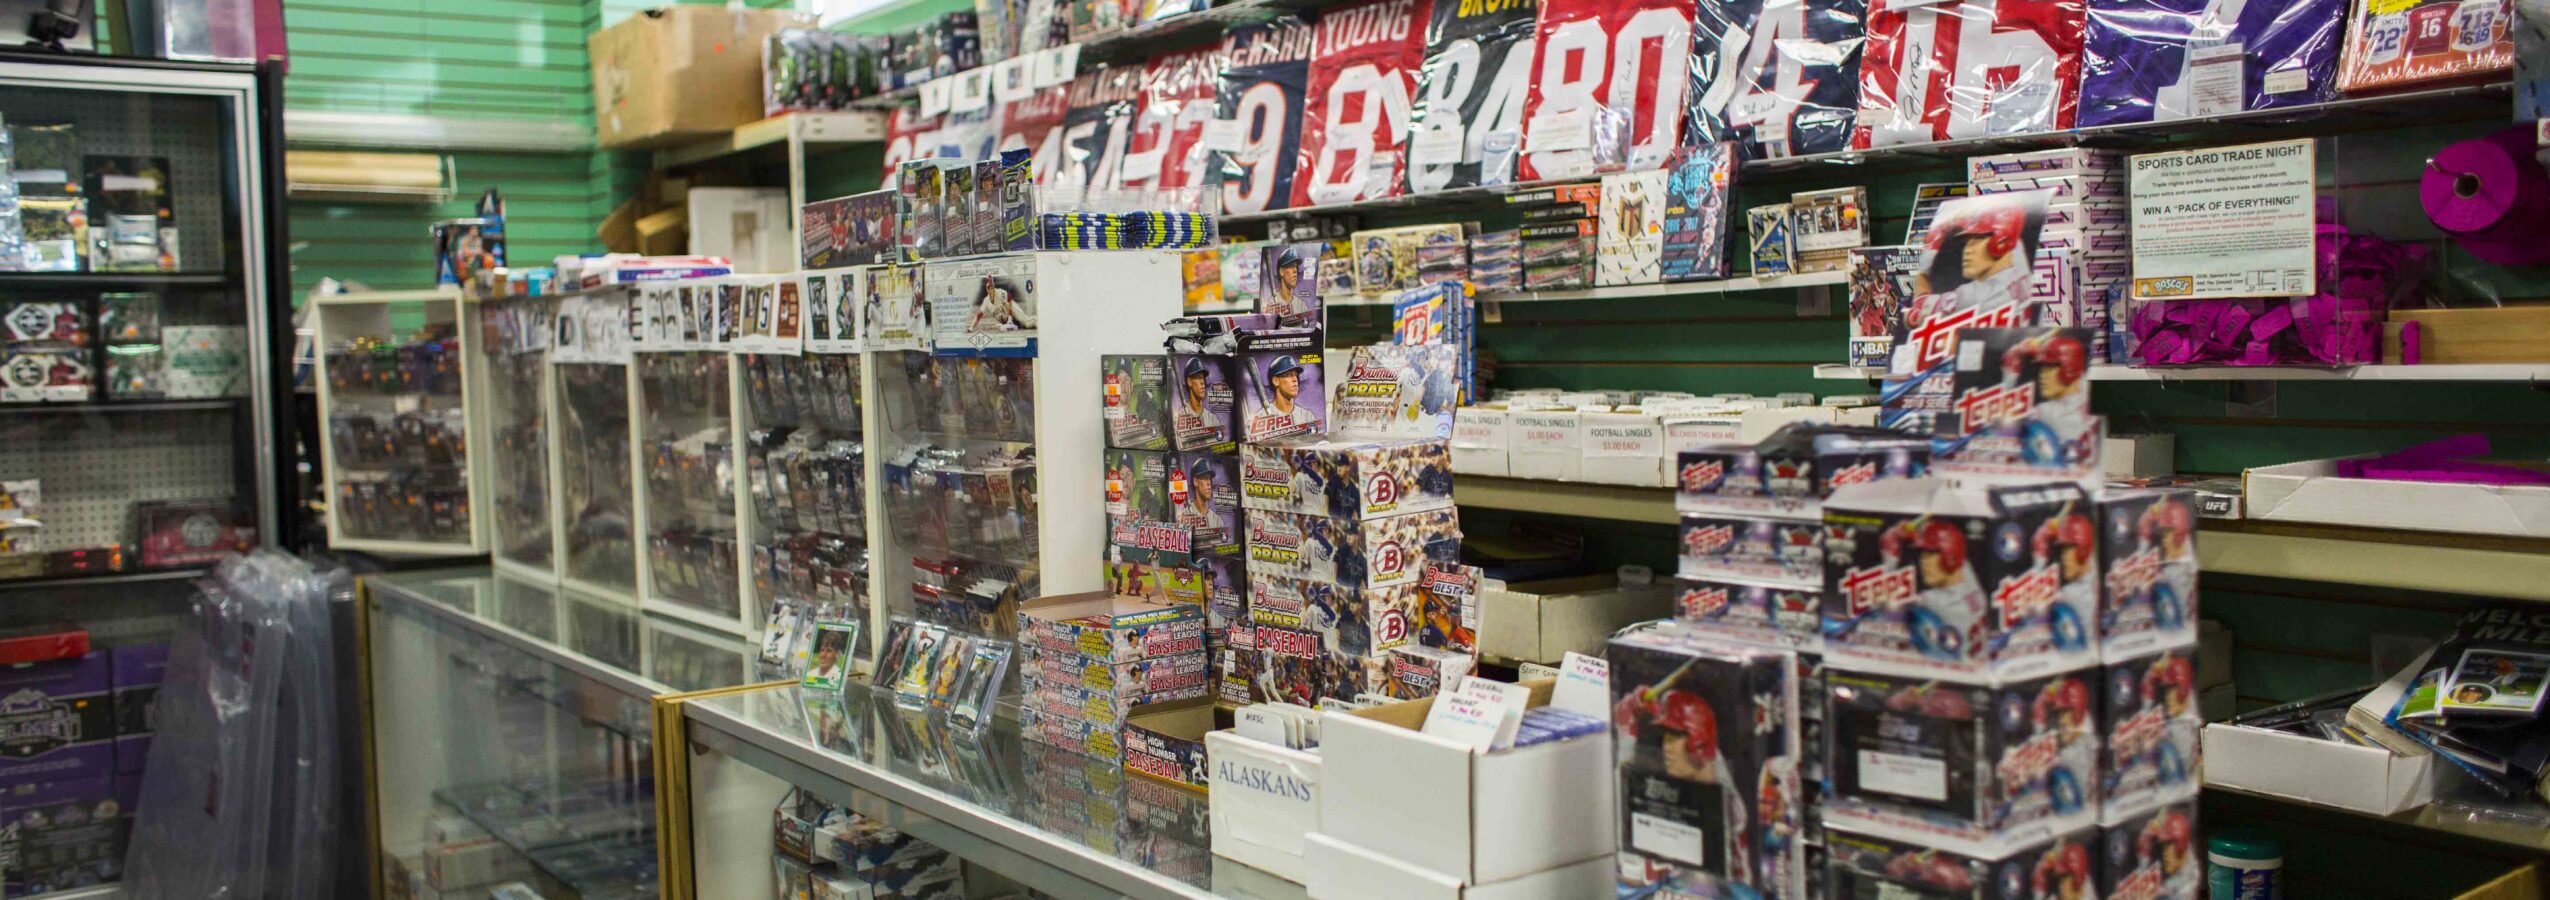 A view of the Spenard BOSCO'S interior showing the wall of sportscards in the The Card Shop.